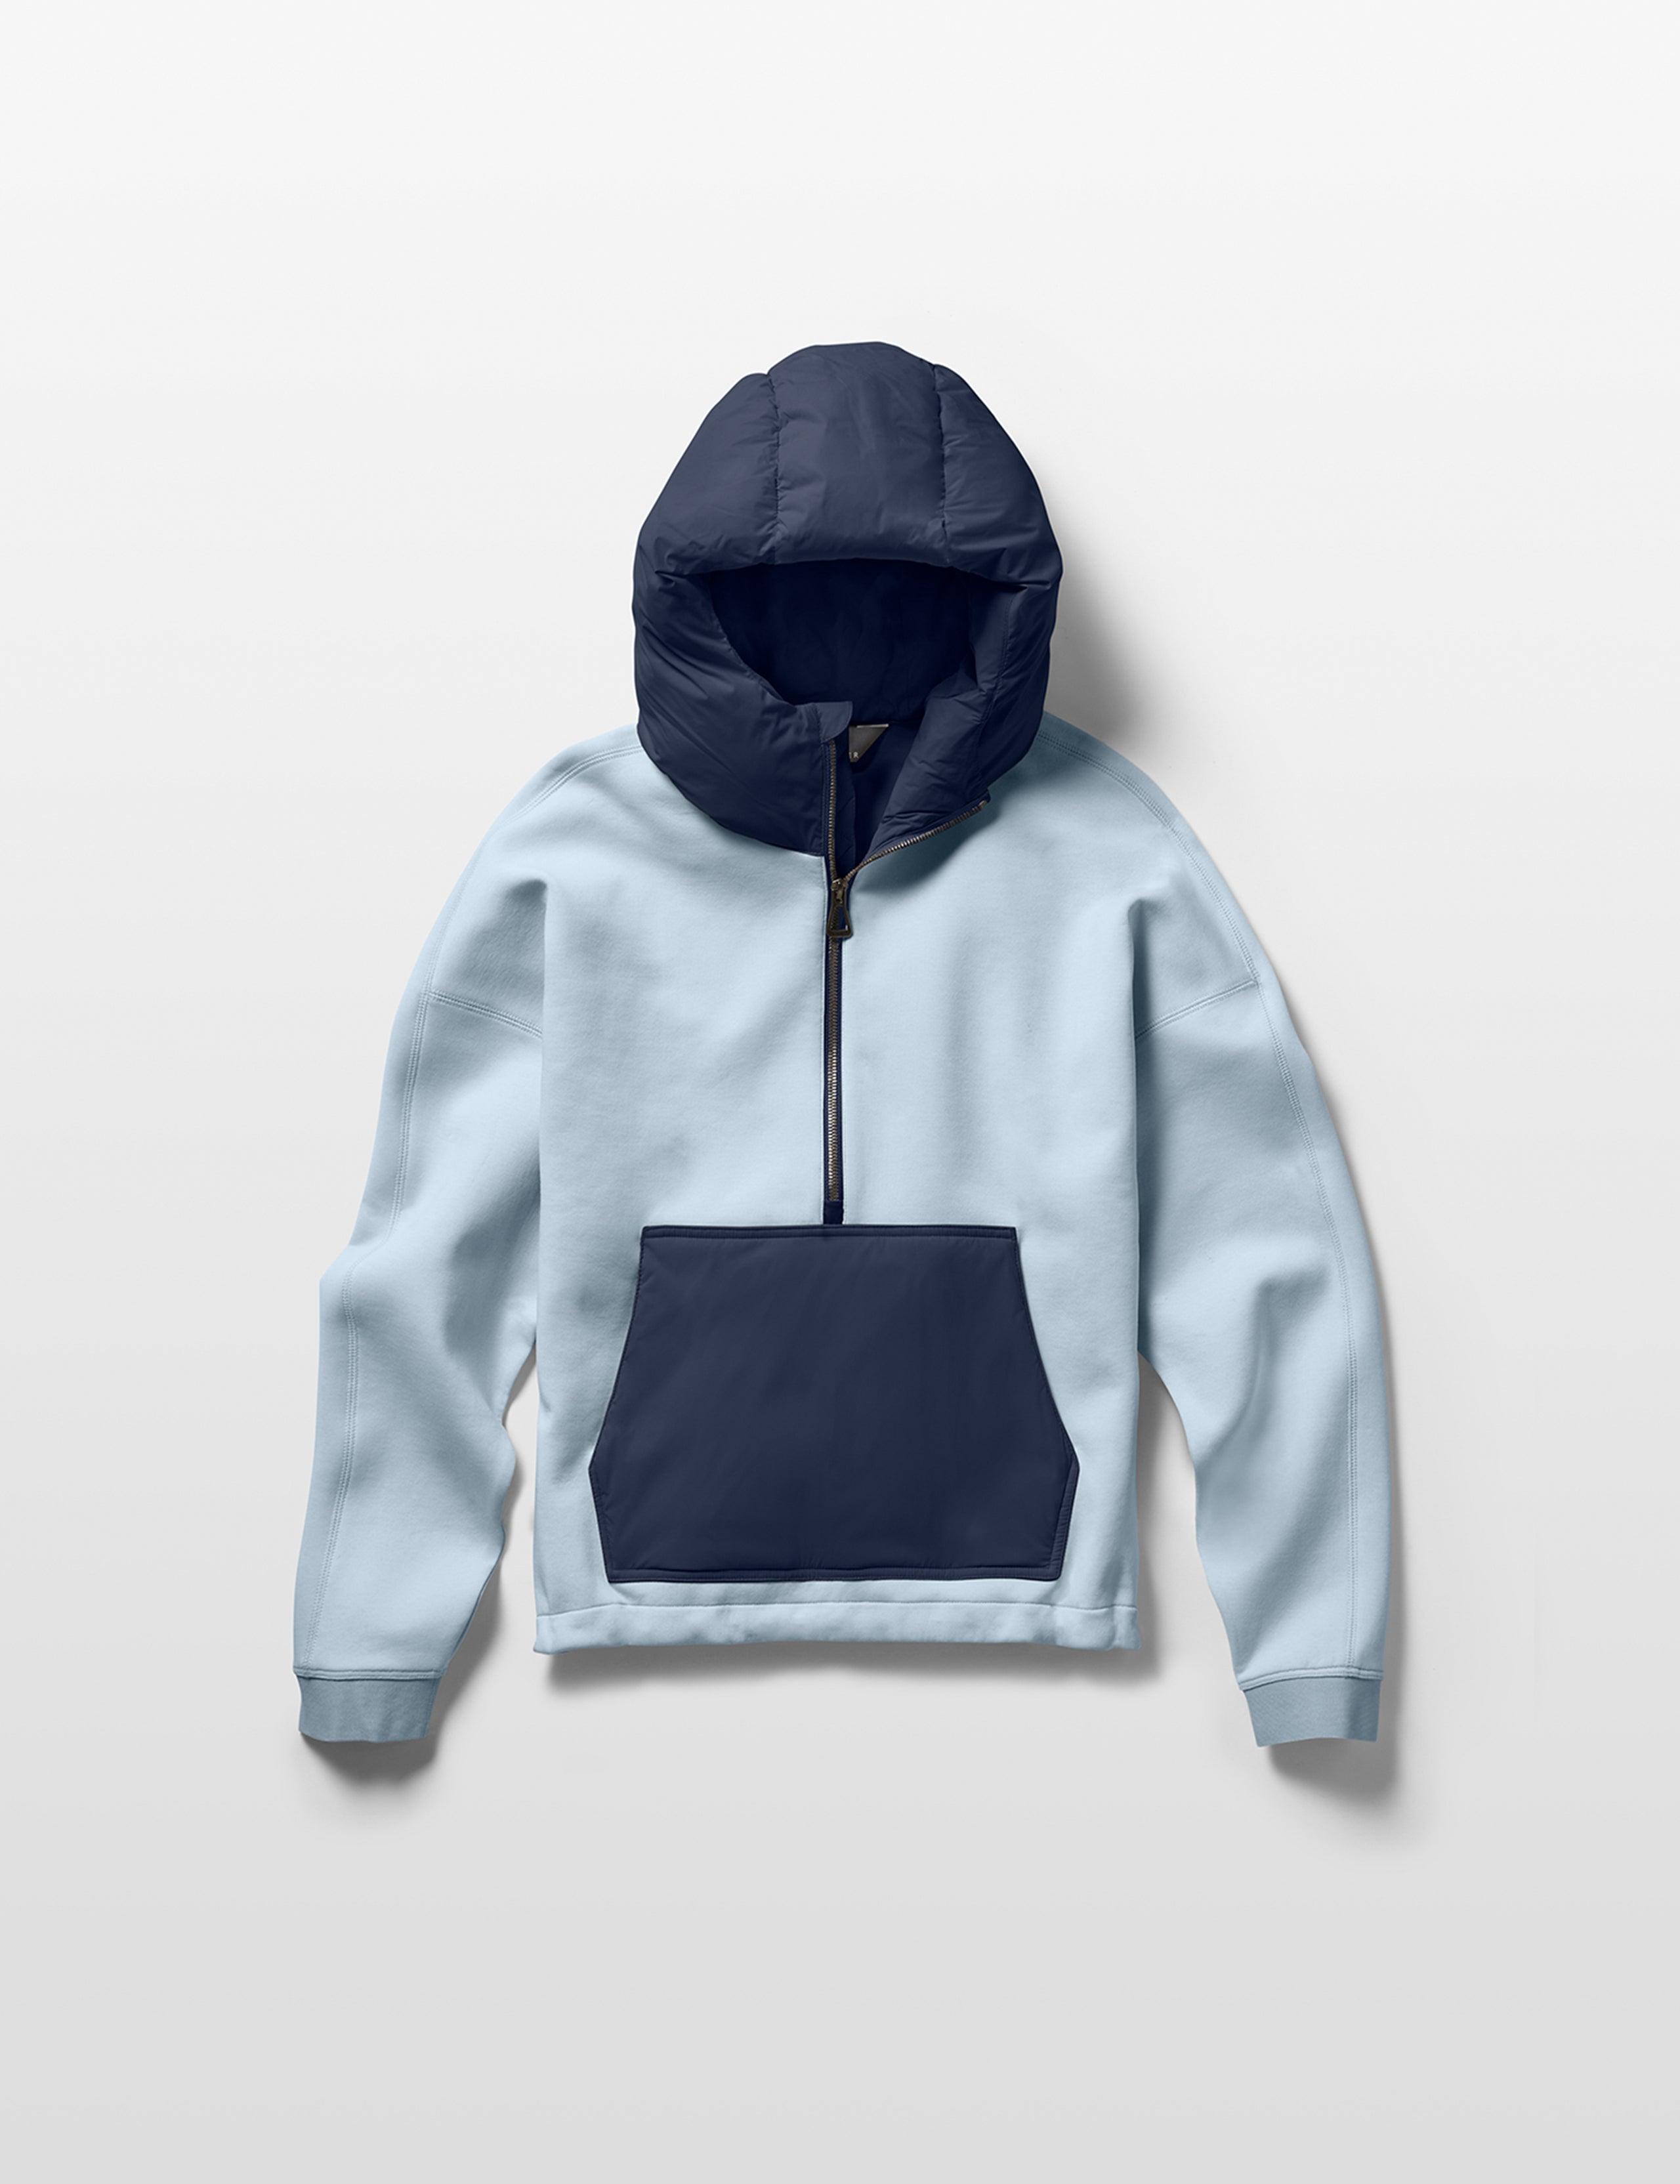 Blue Align Hooded Anorak from AETHER Apparel.